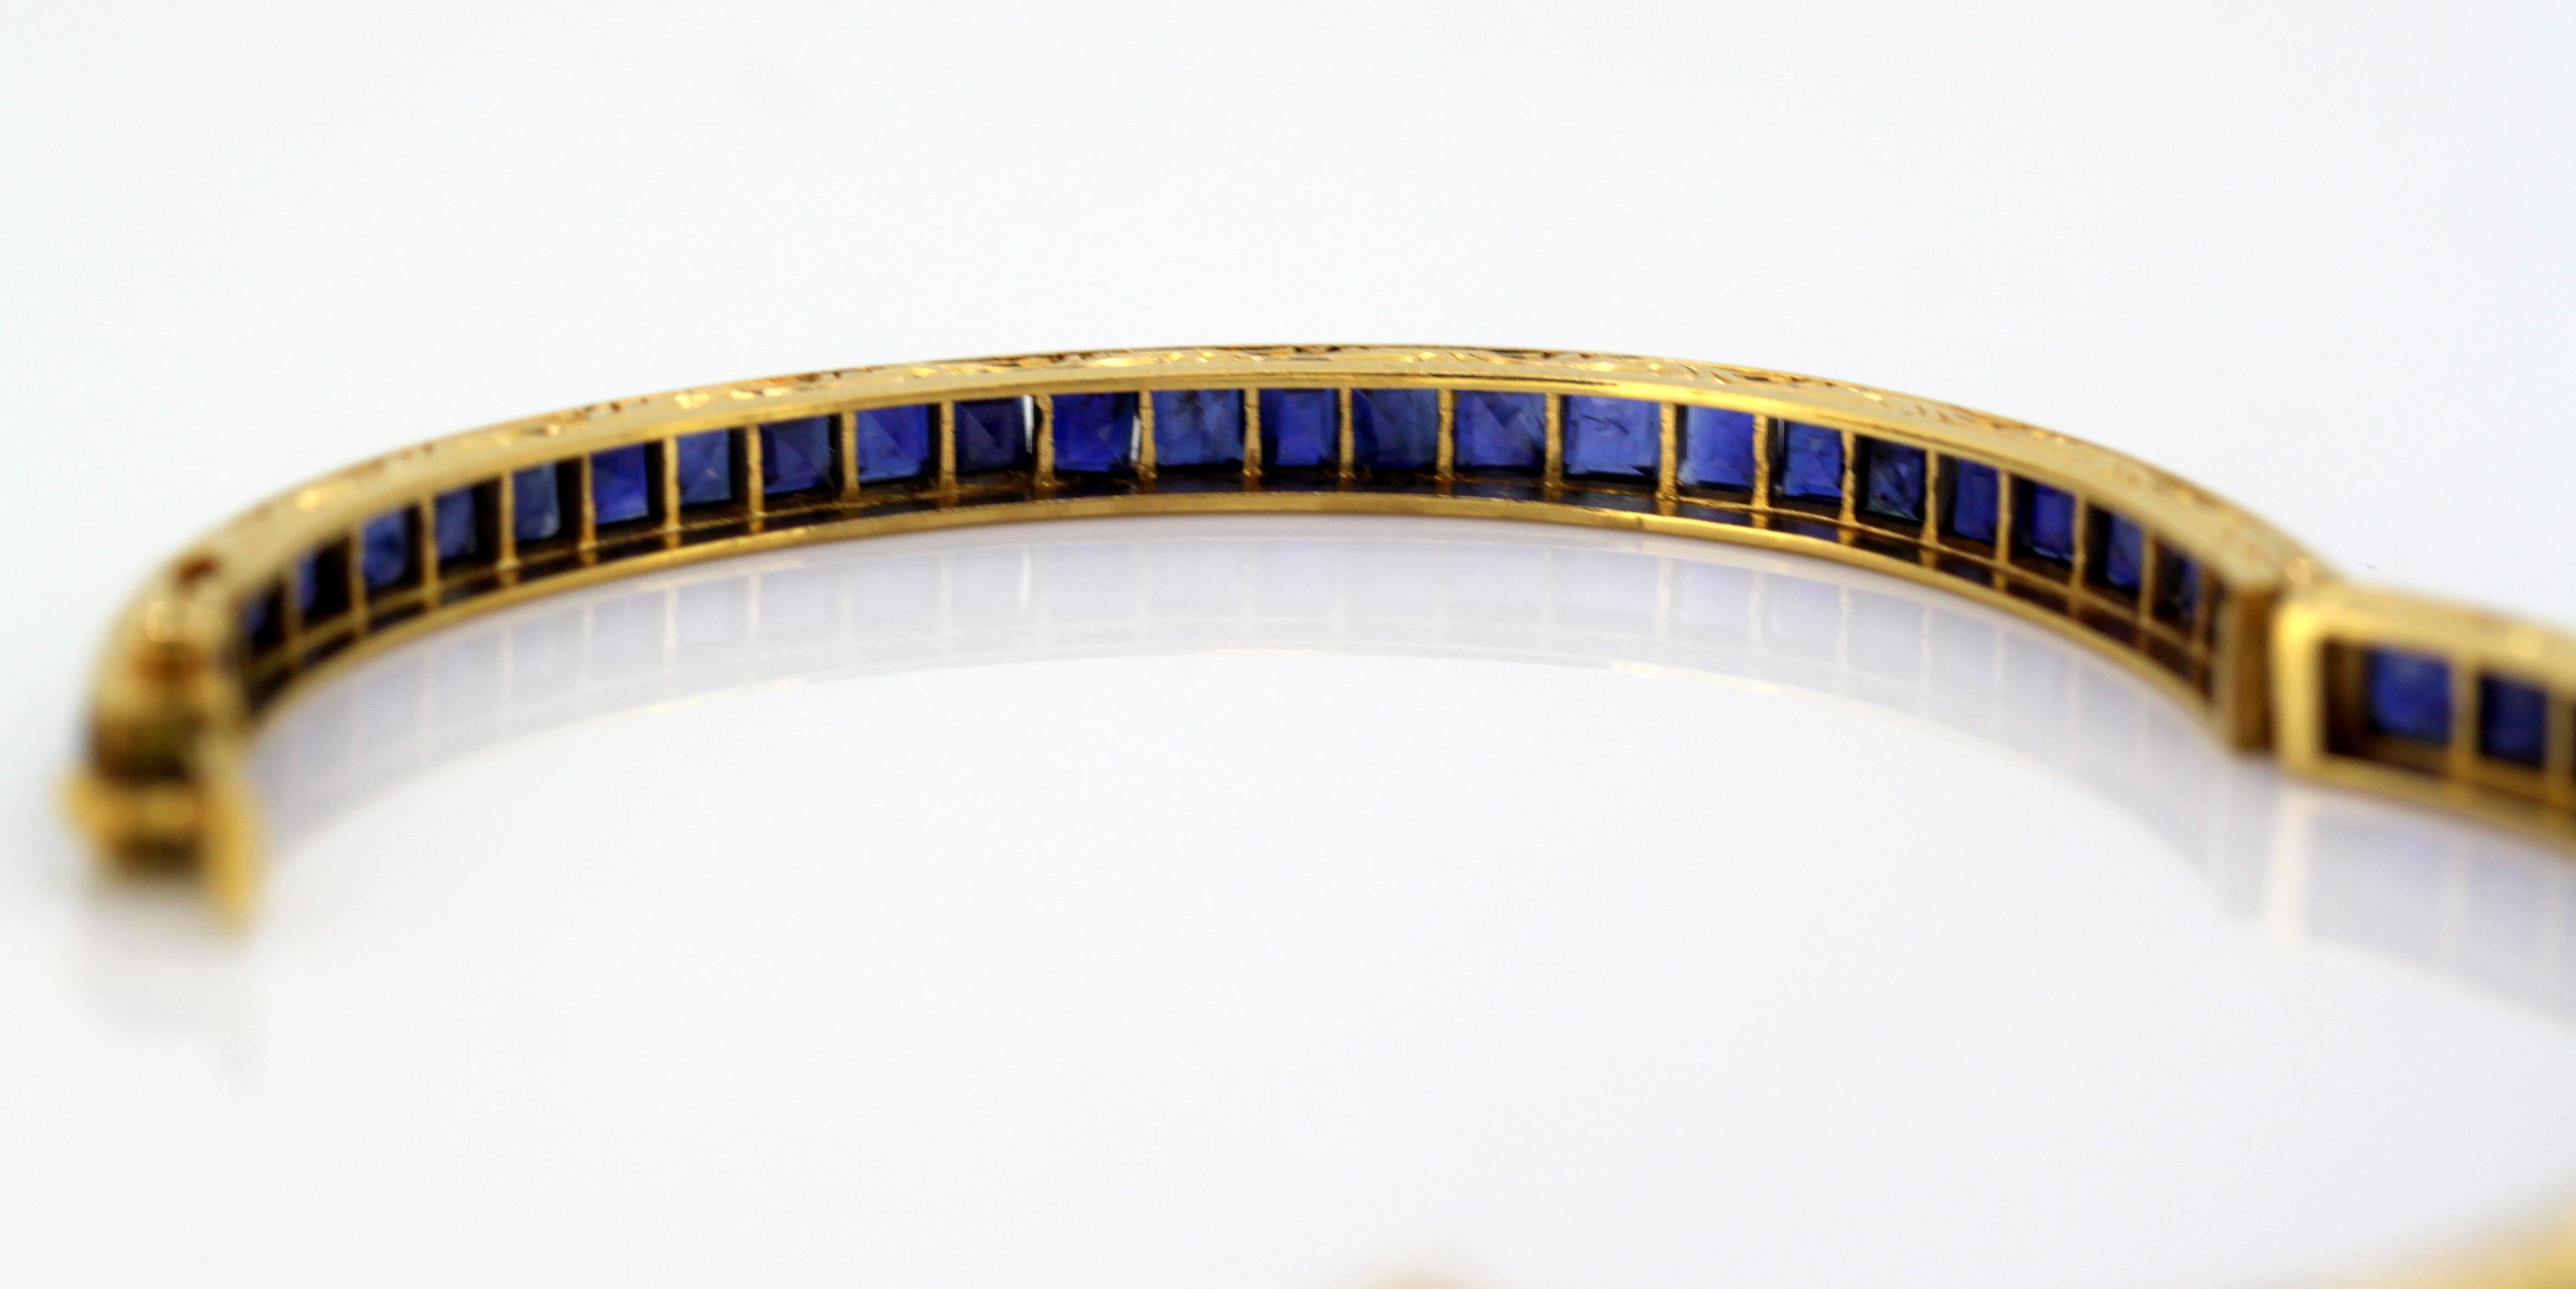 Antique Art Deco 18 Karat Gold Ladies Bangle with Sapphires Made in France, 1920 8